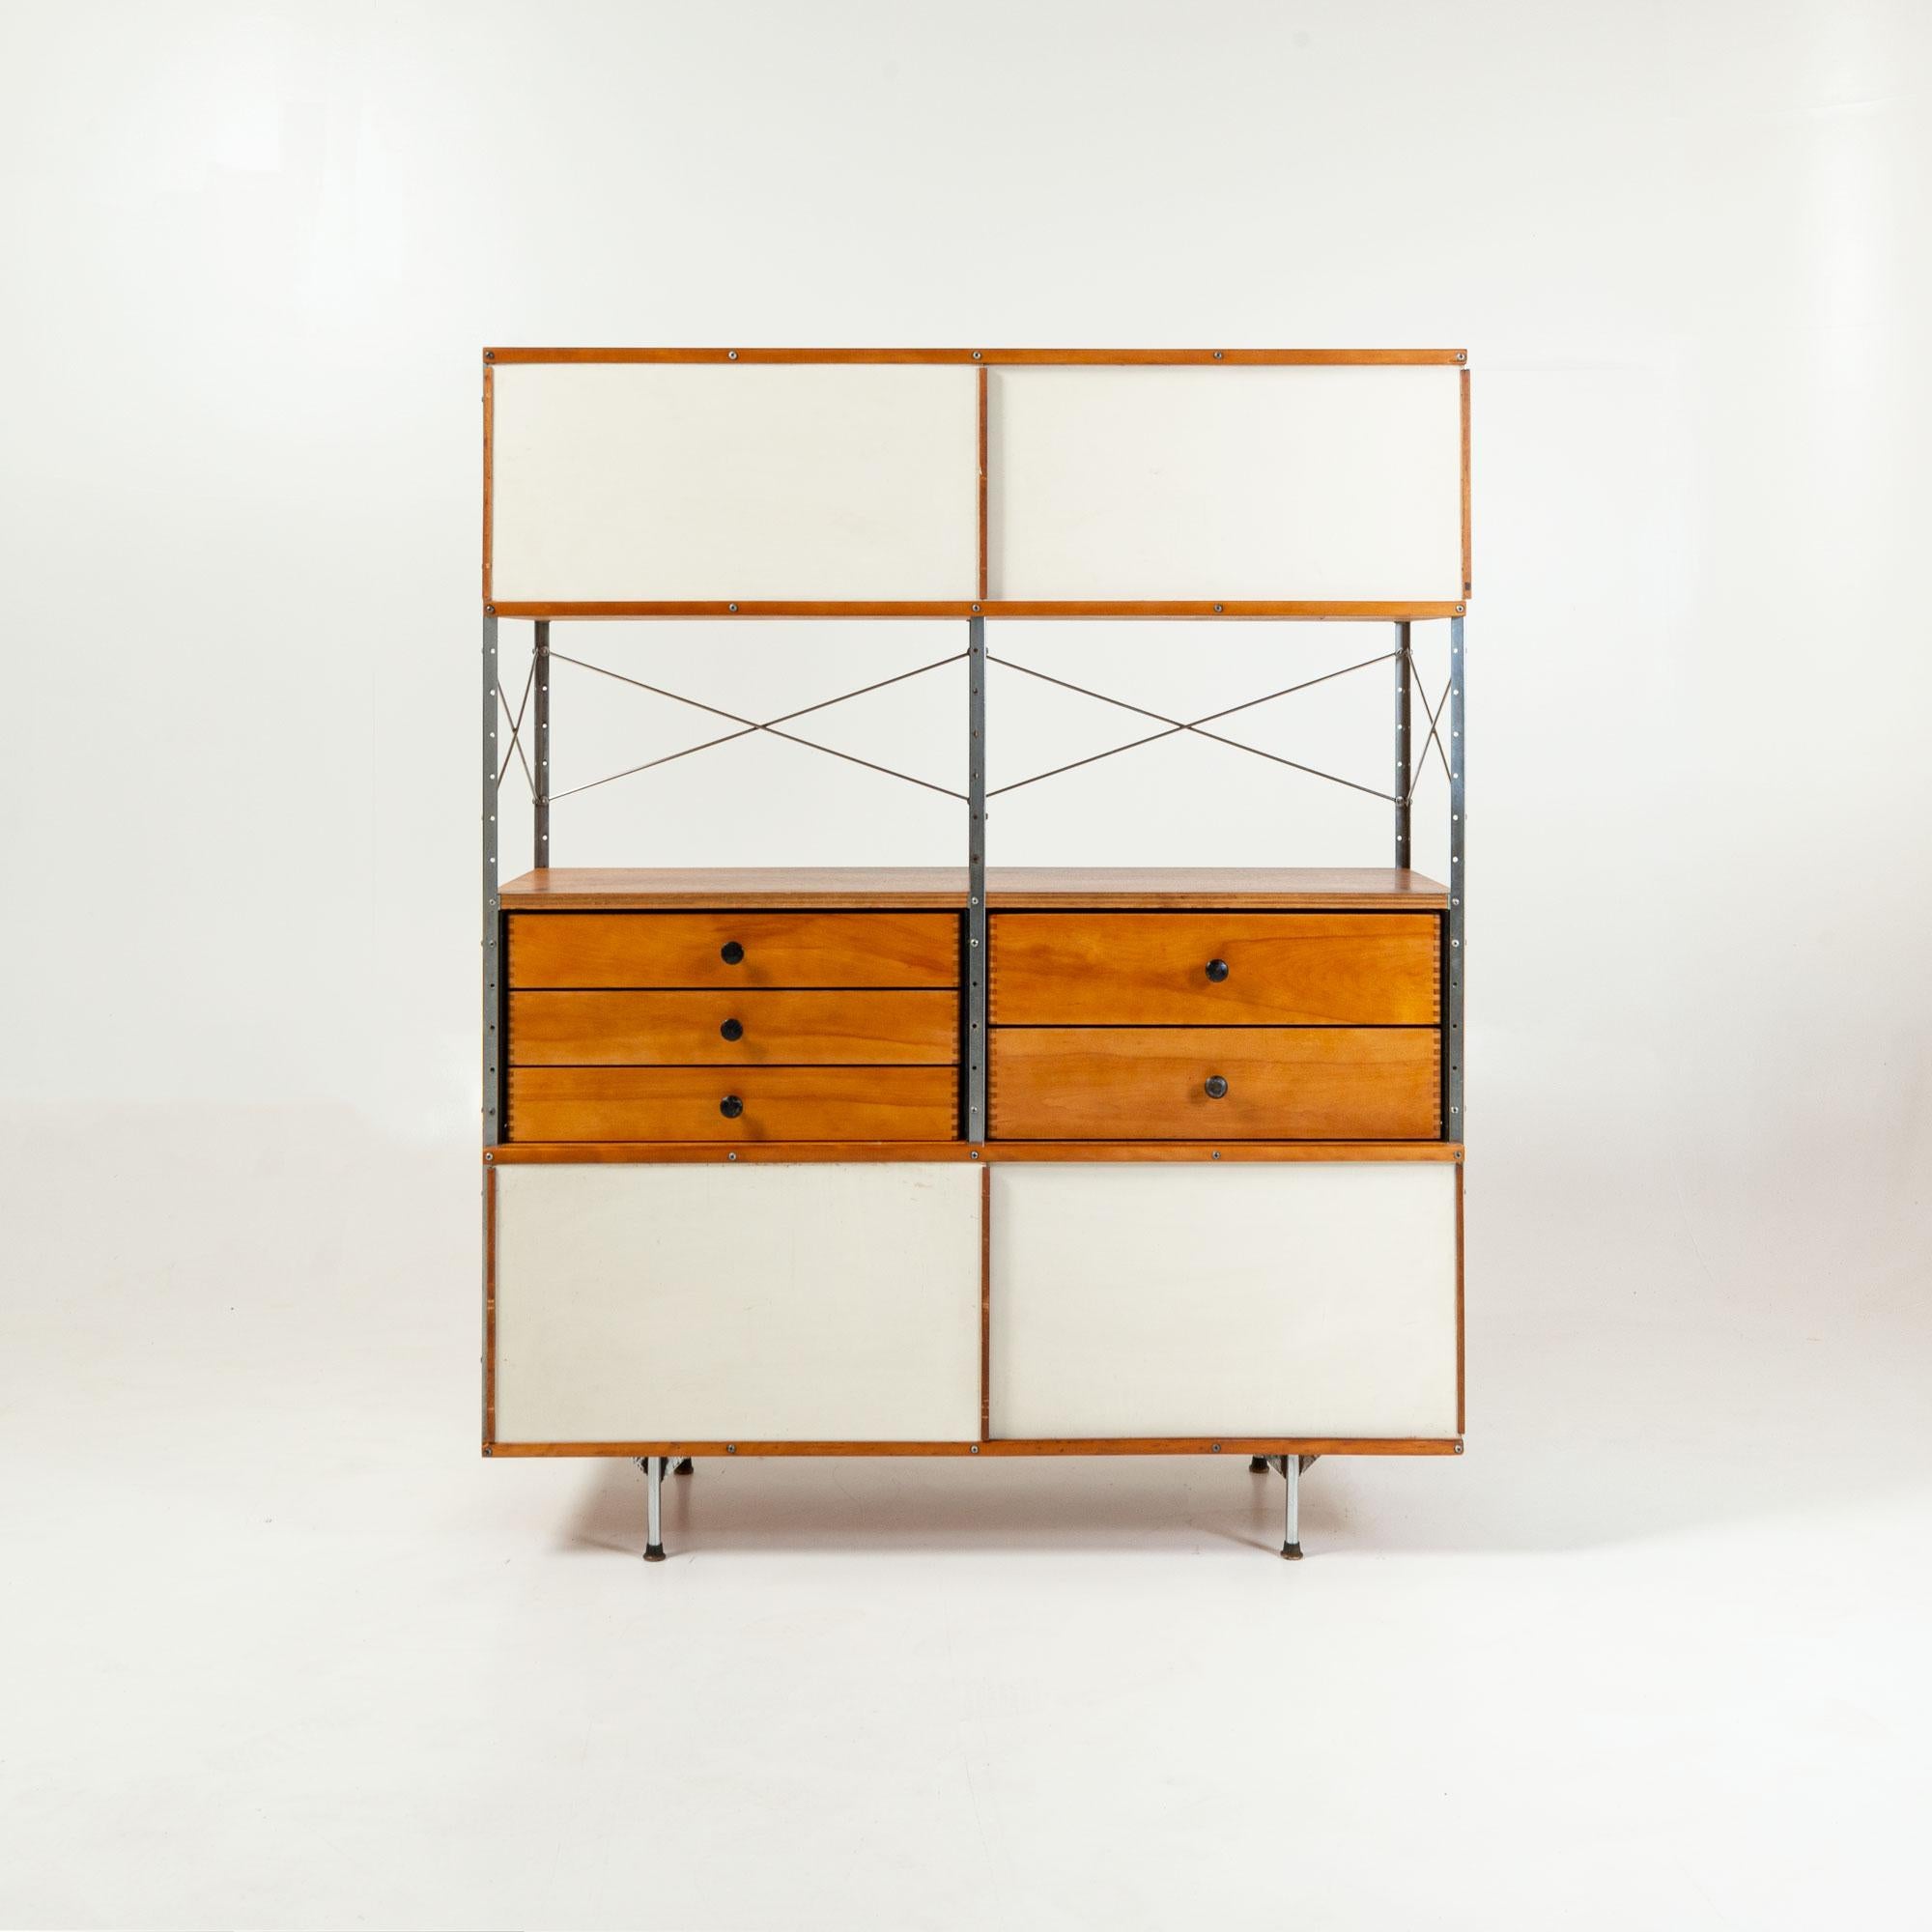 The Eames Storage Unit (ESU) is a lightweight system of freestanding modular cabinets that was initially promoted as an economical solution to the changing storage needs of American families after World War II. Although modular furniture was not new